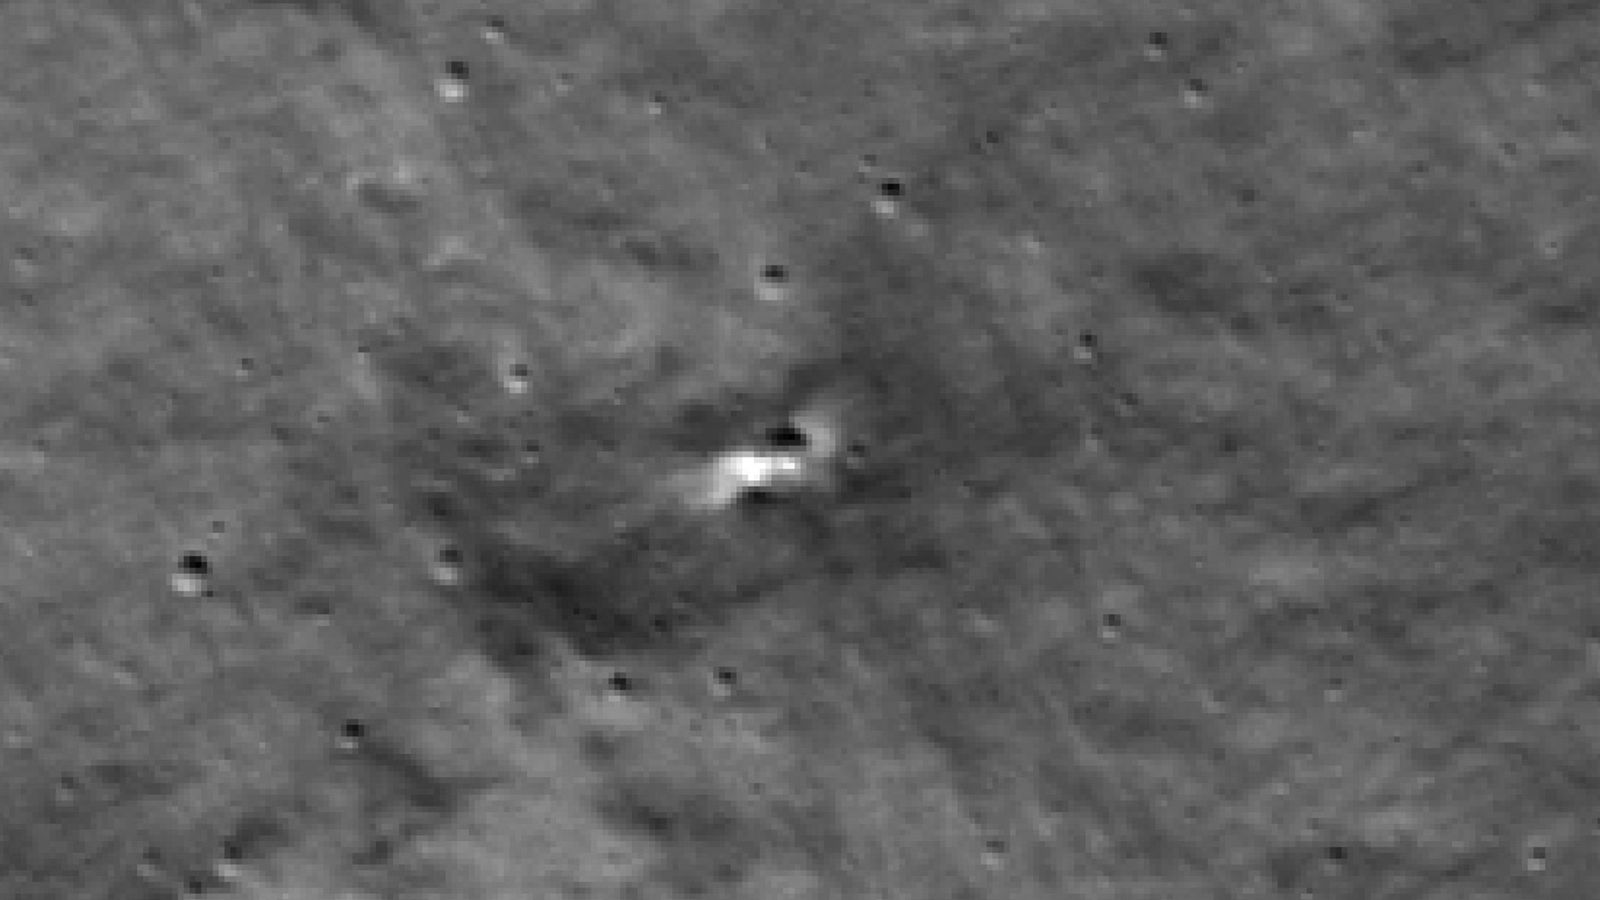 Crashed Russian spacecraft likely cause of new crater on the moon - as NASA releases images